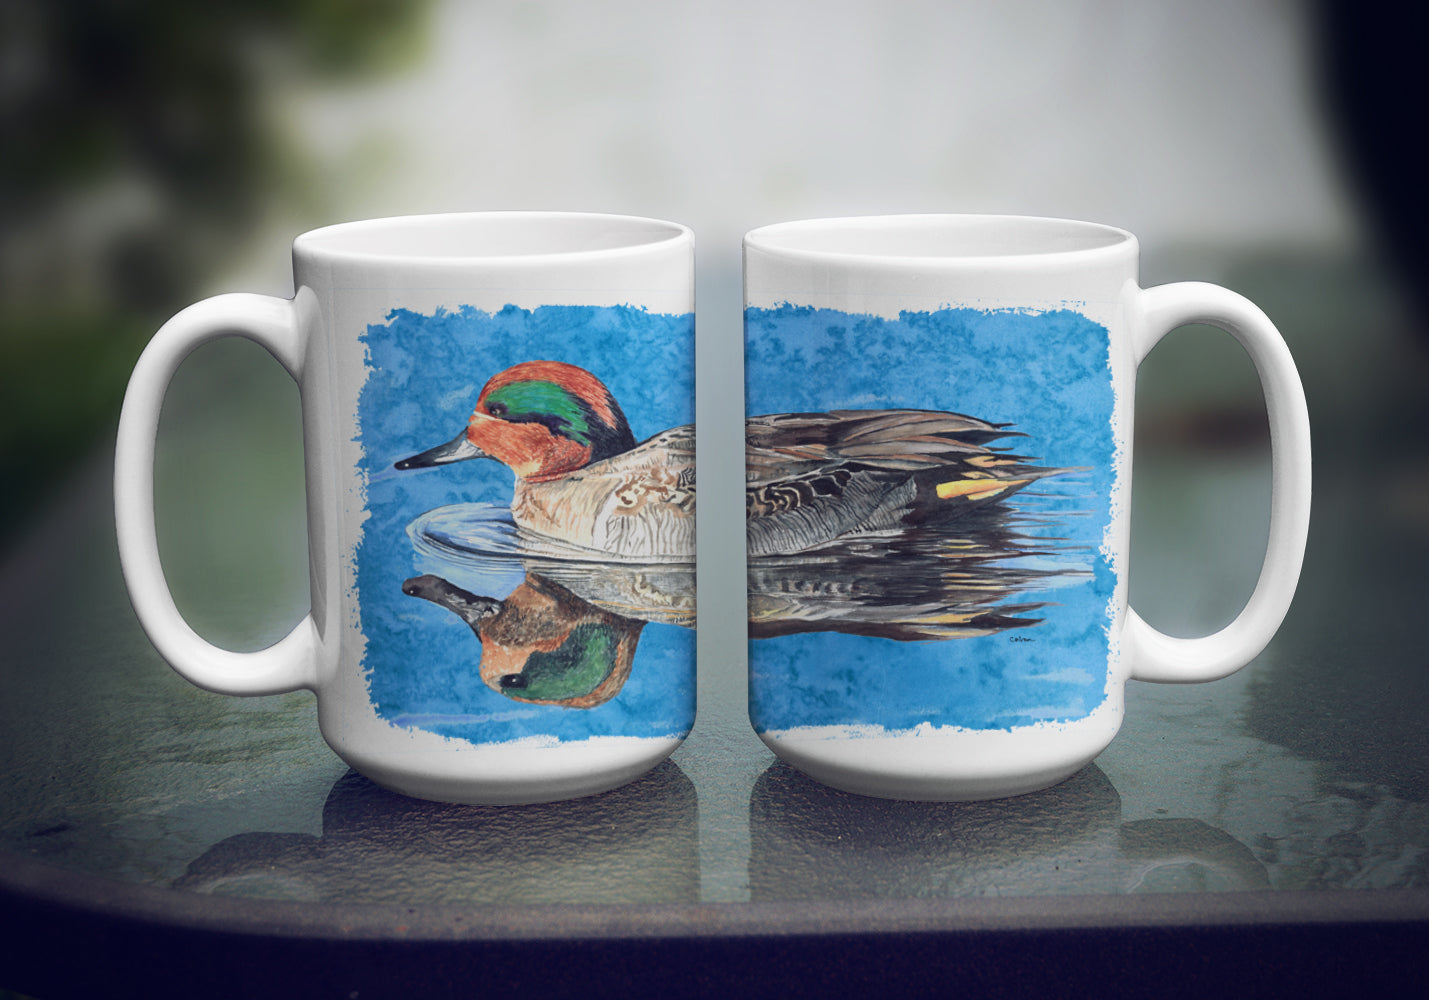 Teal Duck Dishwasher Safe Microwavable Ceramic Coffee Mug 15 ounce 8830CM15  the-store.com.